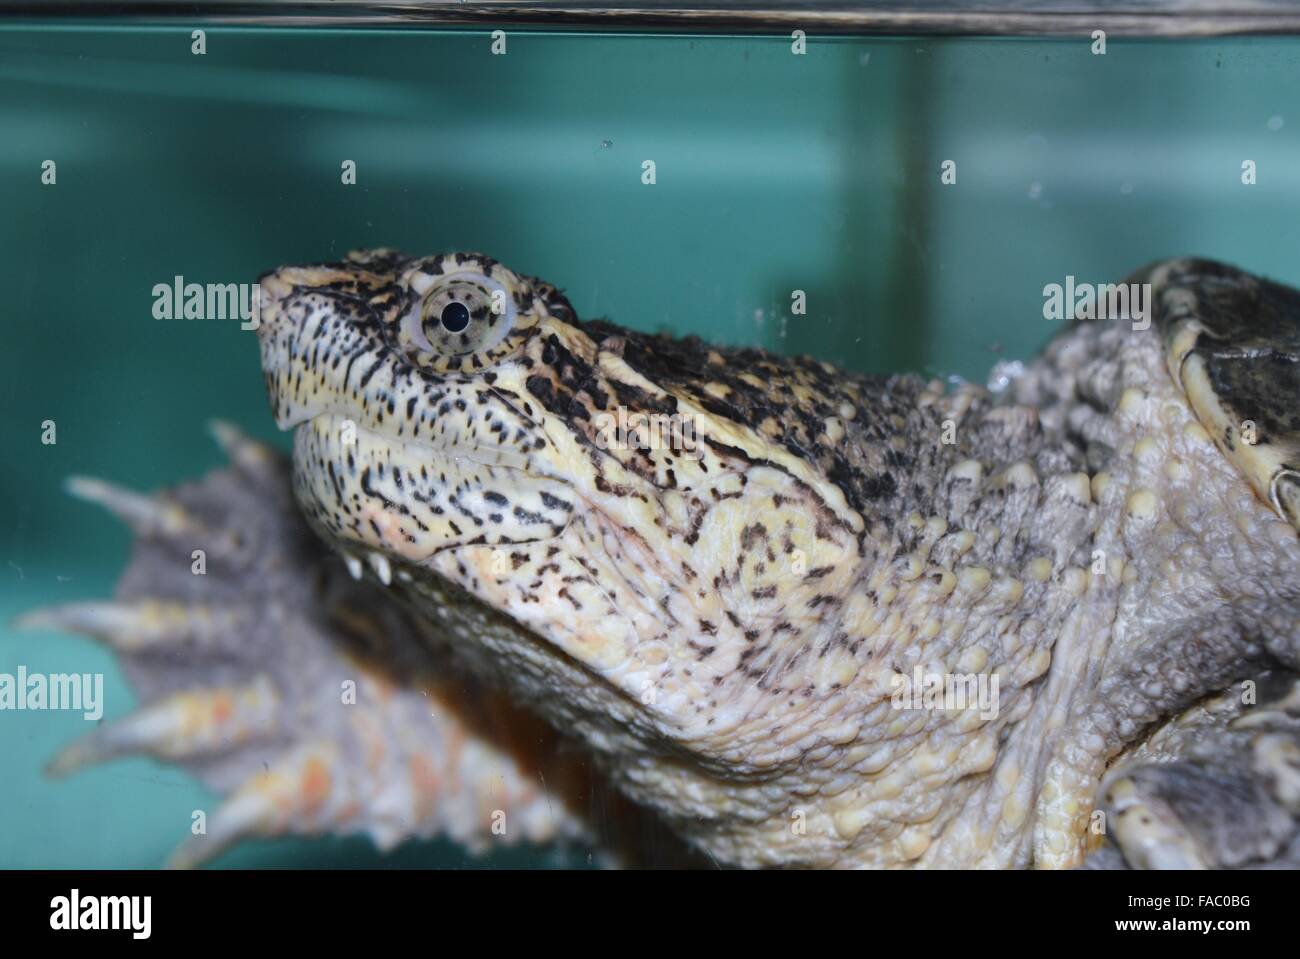 Snapping turtle surfacing in the water Stock Photo